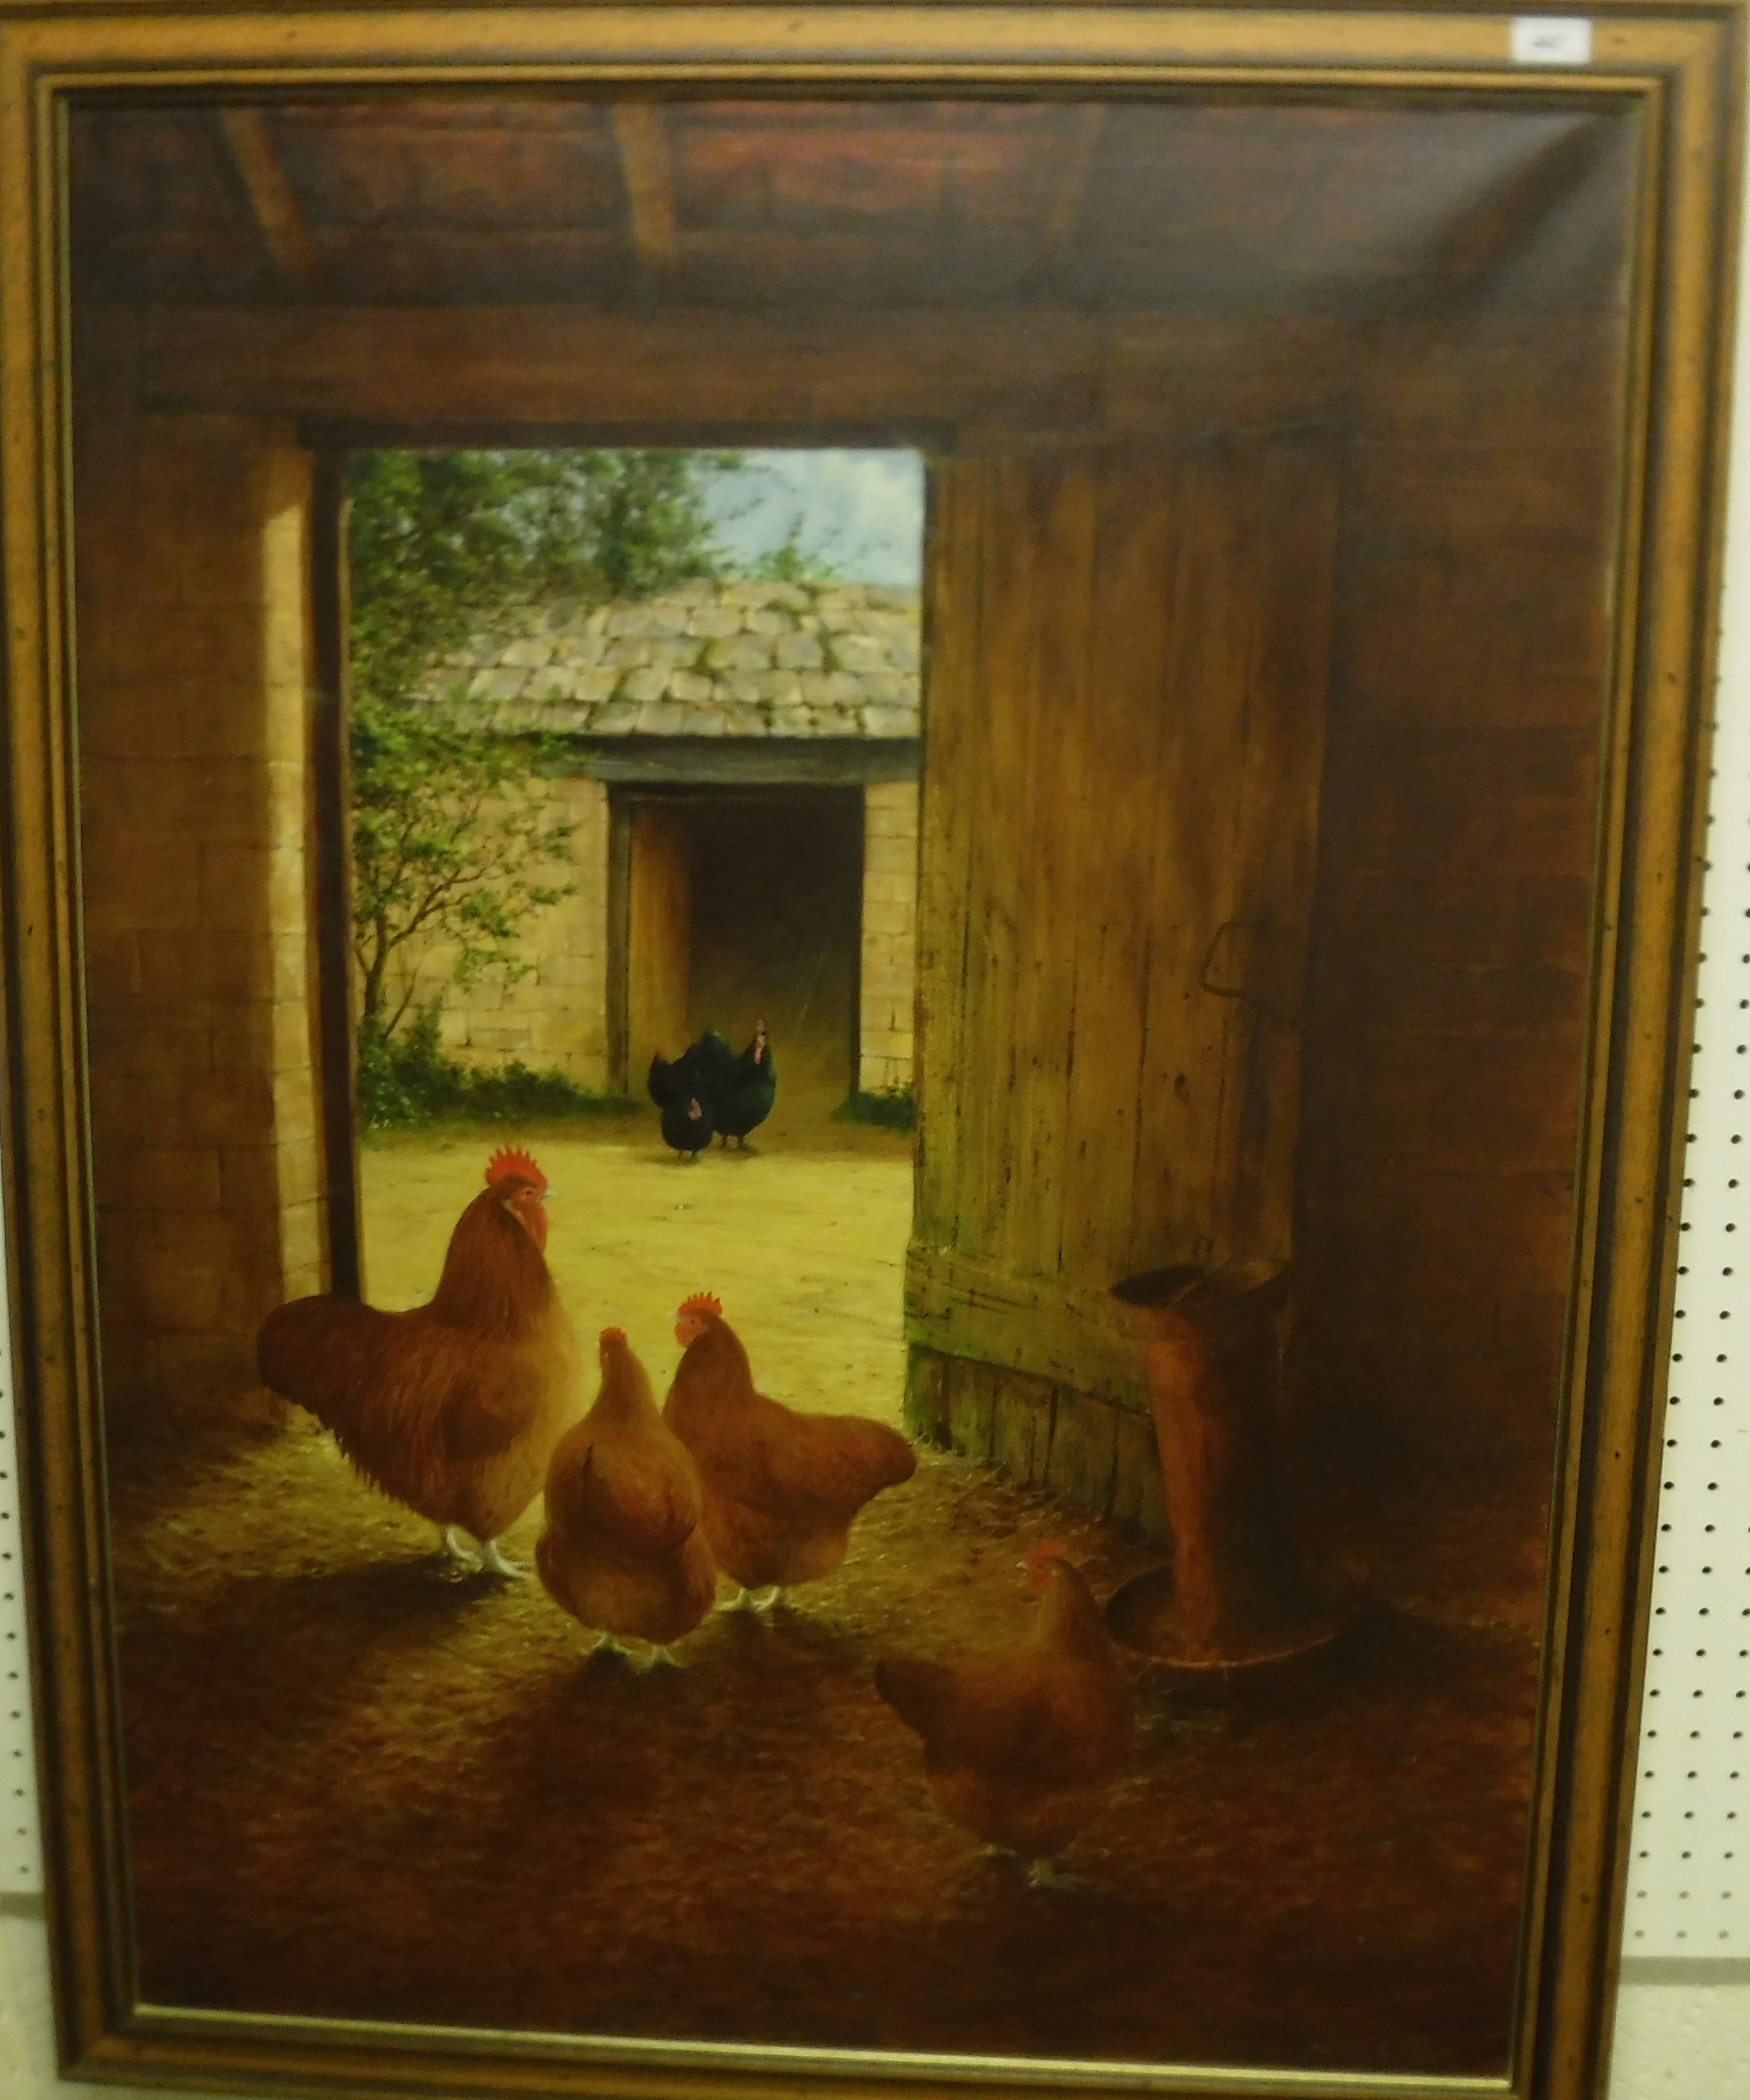 BEV TAYLOR "Chickens in a farmyard", oil on canvas, signed and dated '88 lower right,